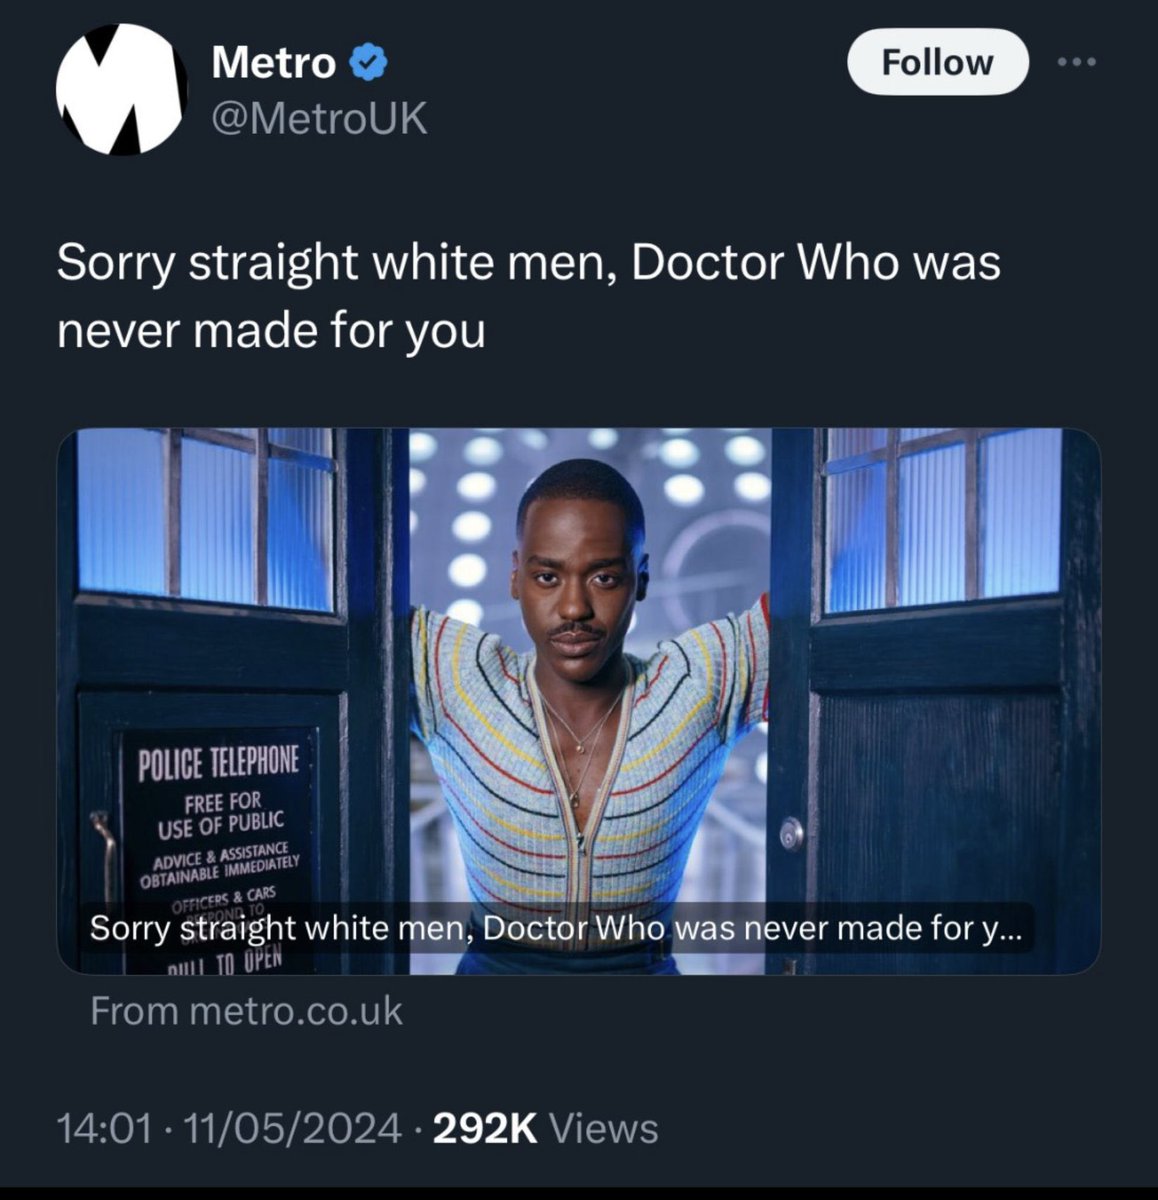 Metro UK deletes its X account after drawing flak for the below post #DoctorWho #MetroUK